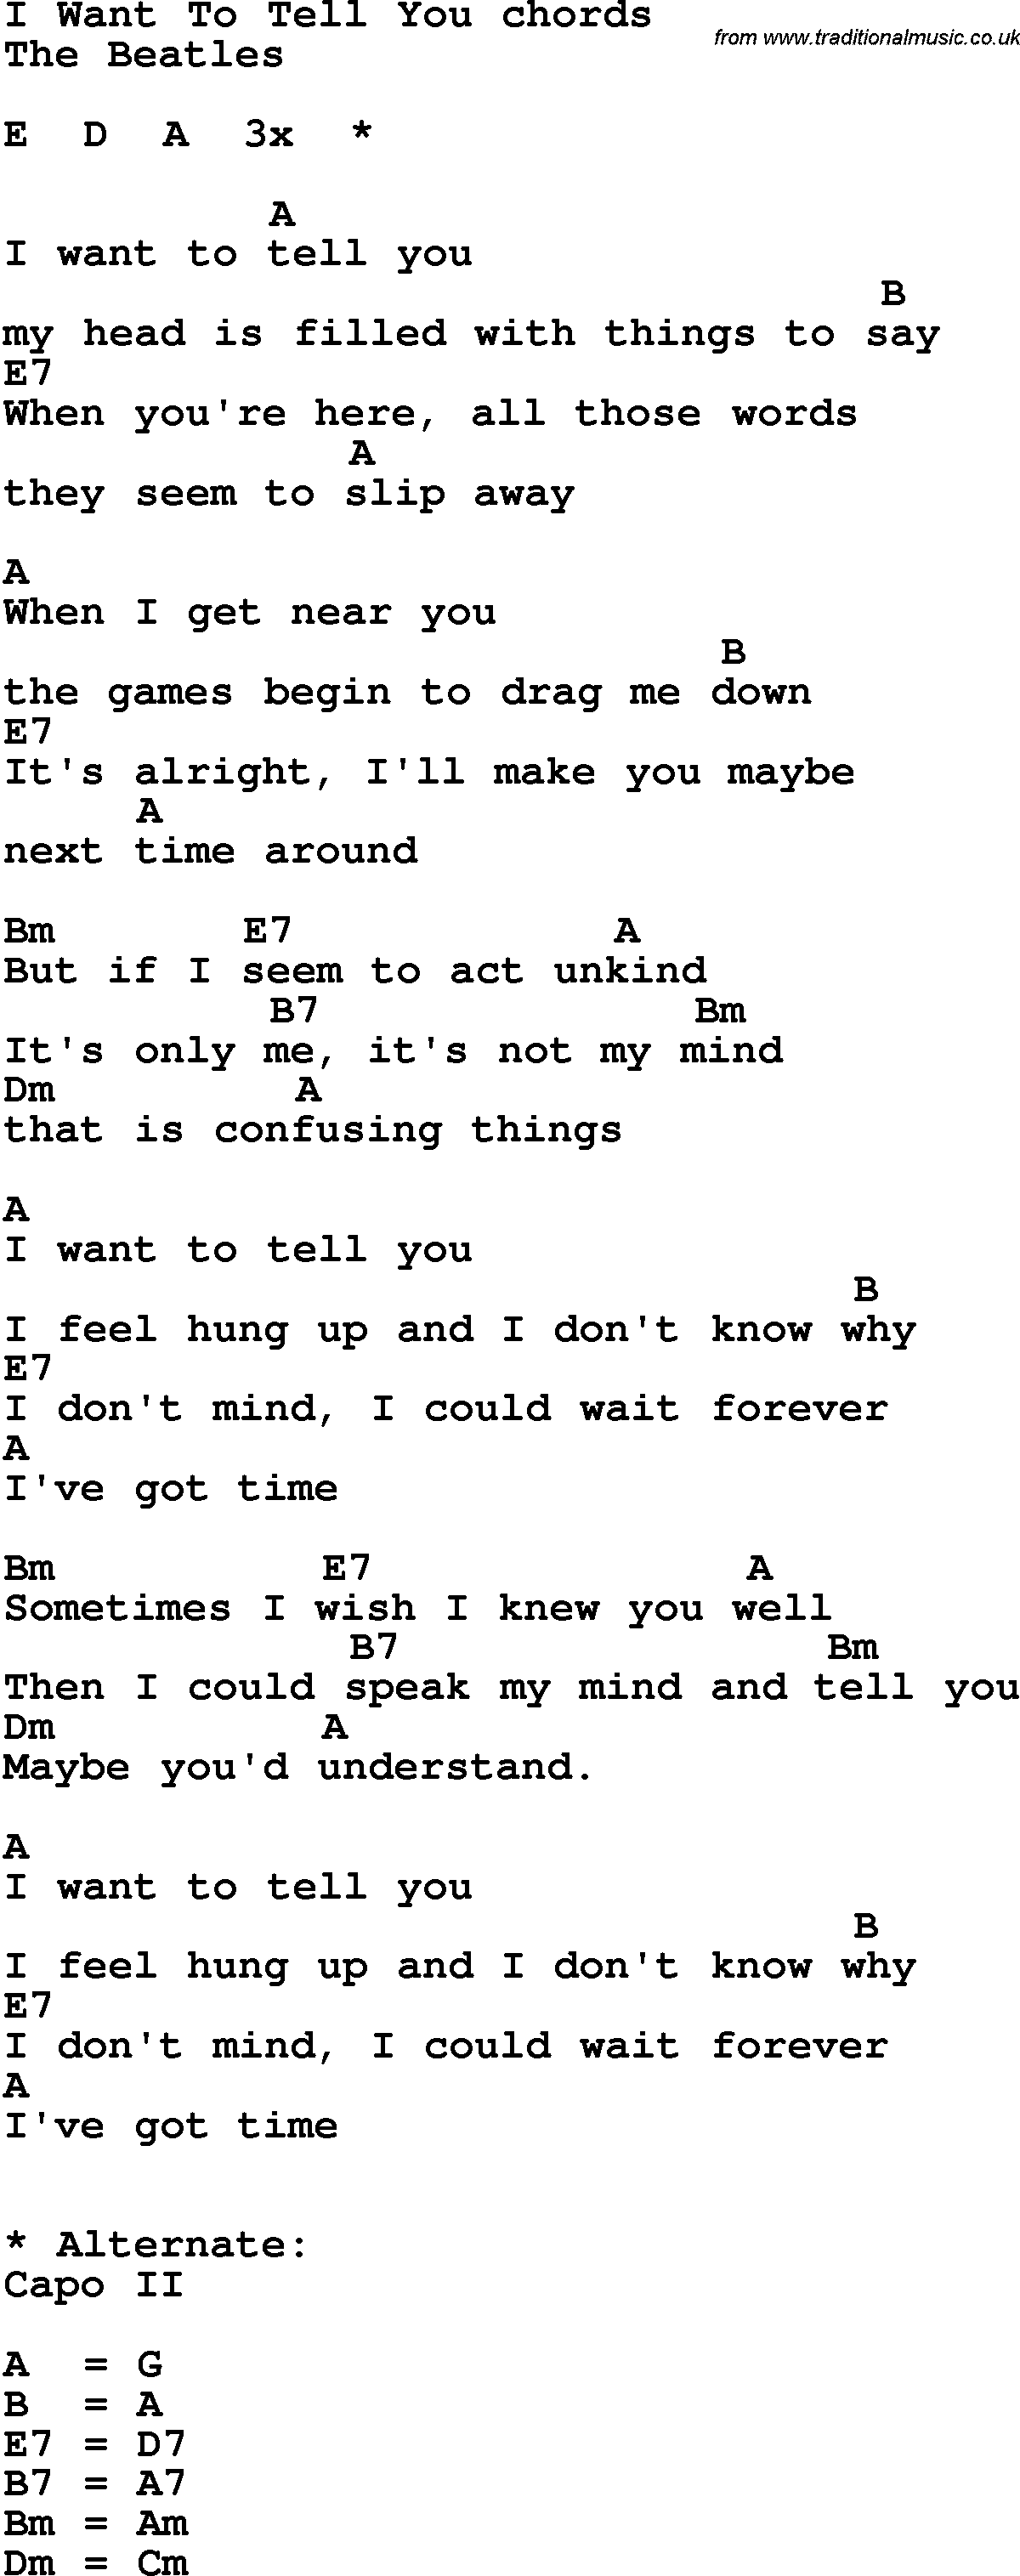 Song Lyrics with guitar chords for I Want To Tell You - The Beatles